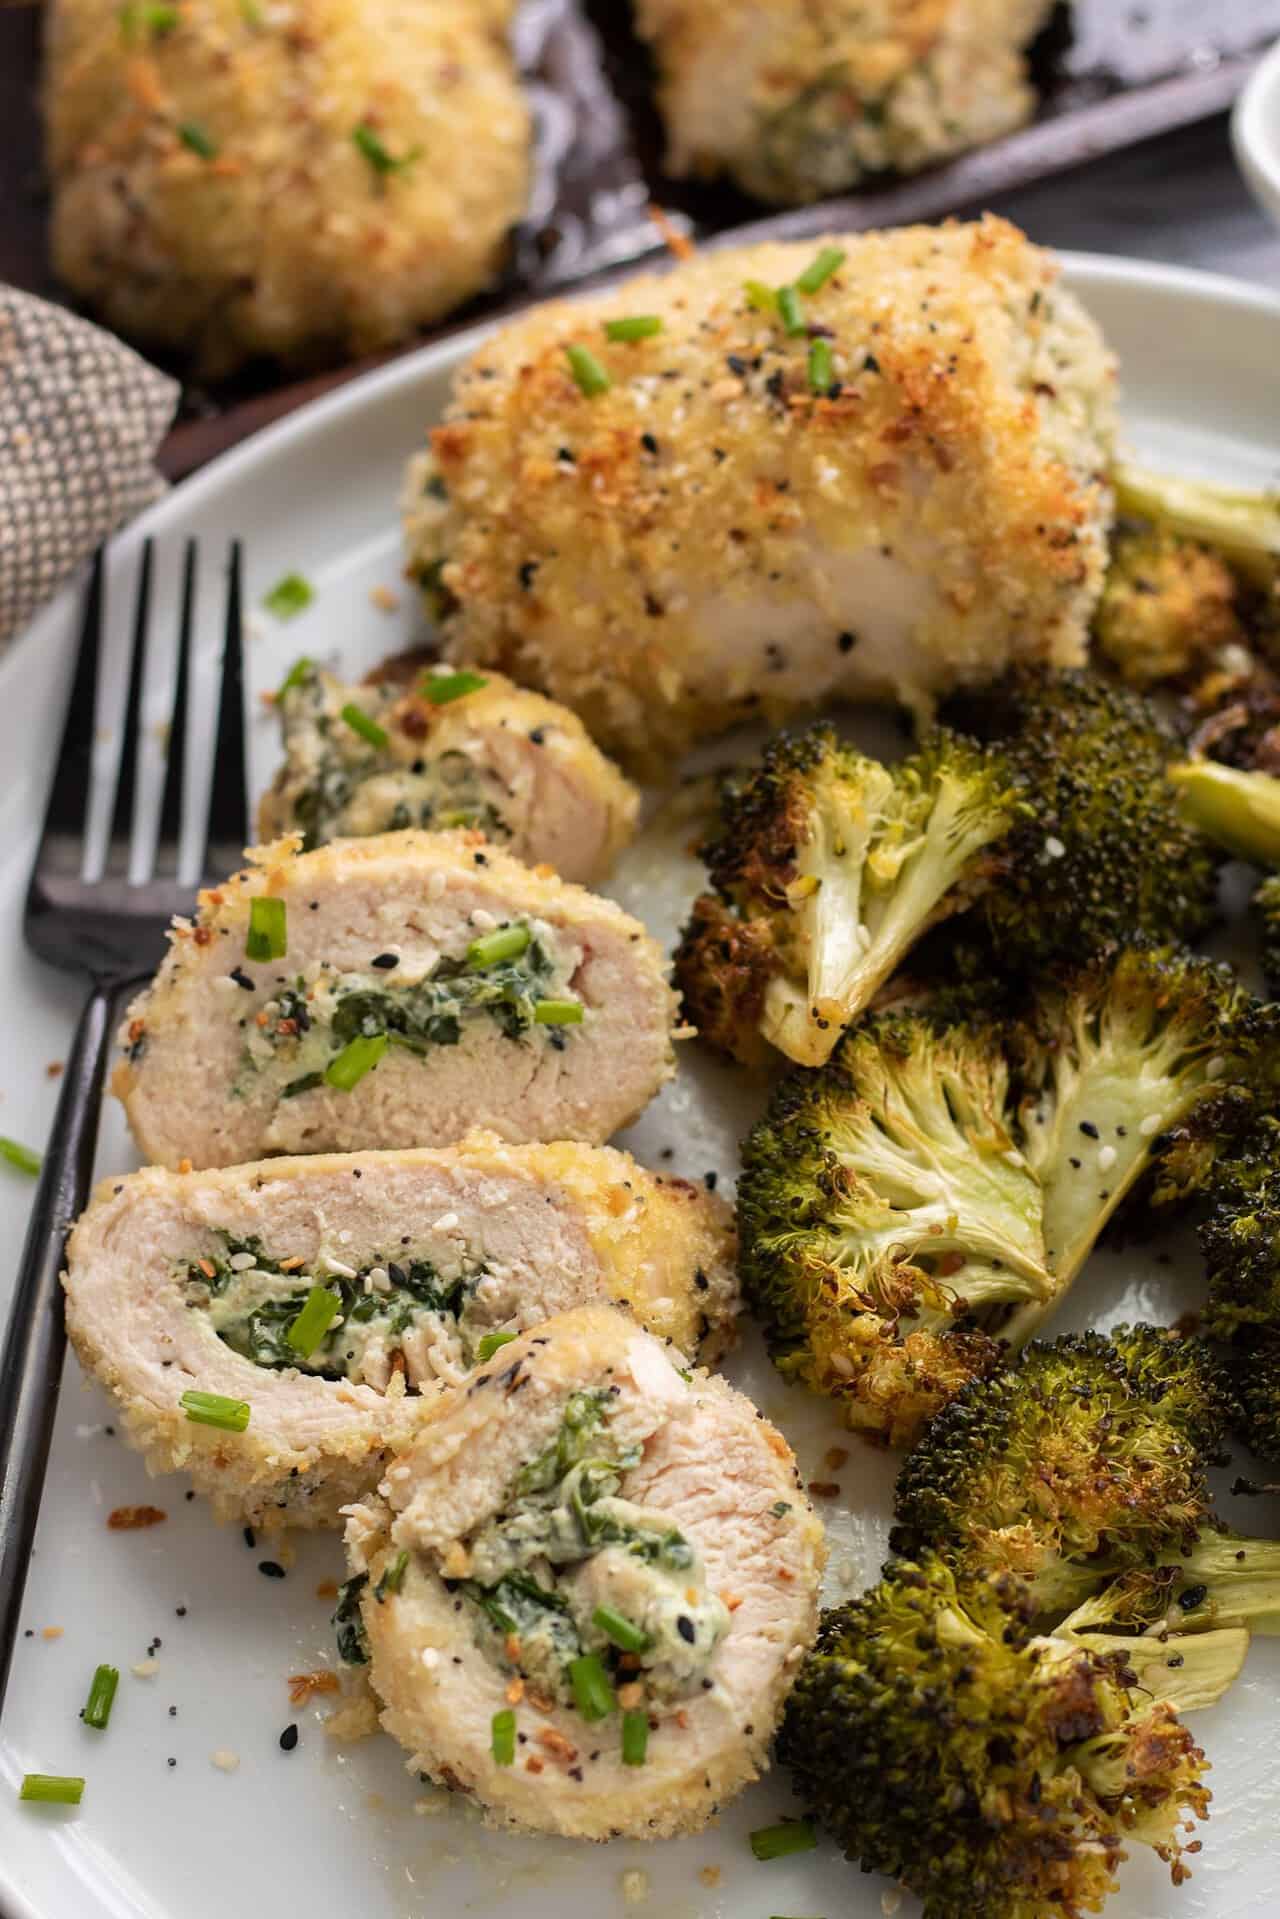 A white dish with sliced stuffed chicken that's been rolled up with cream cheese and spinach. There's roasted broccoli next to the plate with a whole baked chicken breast in the background. The chicken is coated in panko and it's golden. There's a black fork next to the chicken on the plate